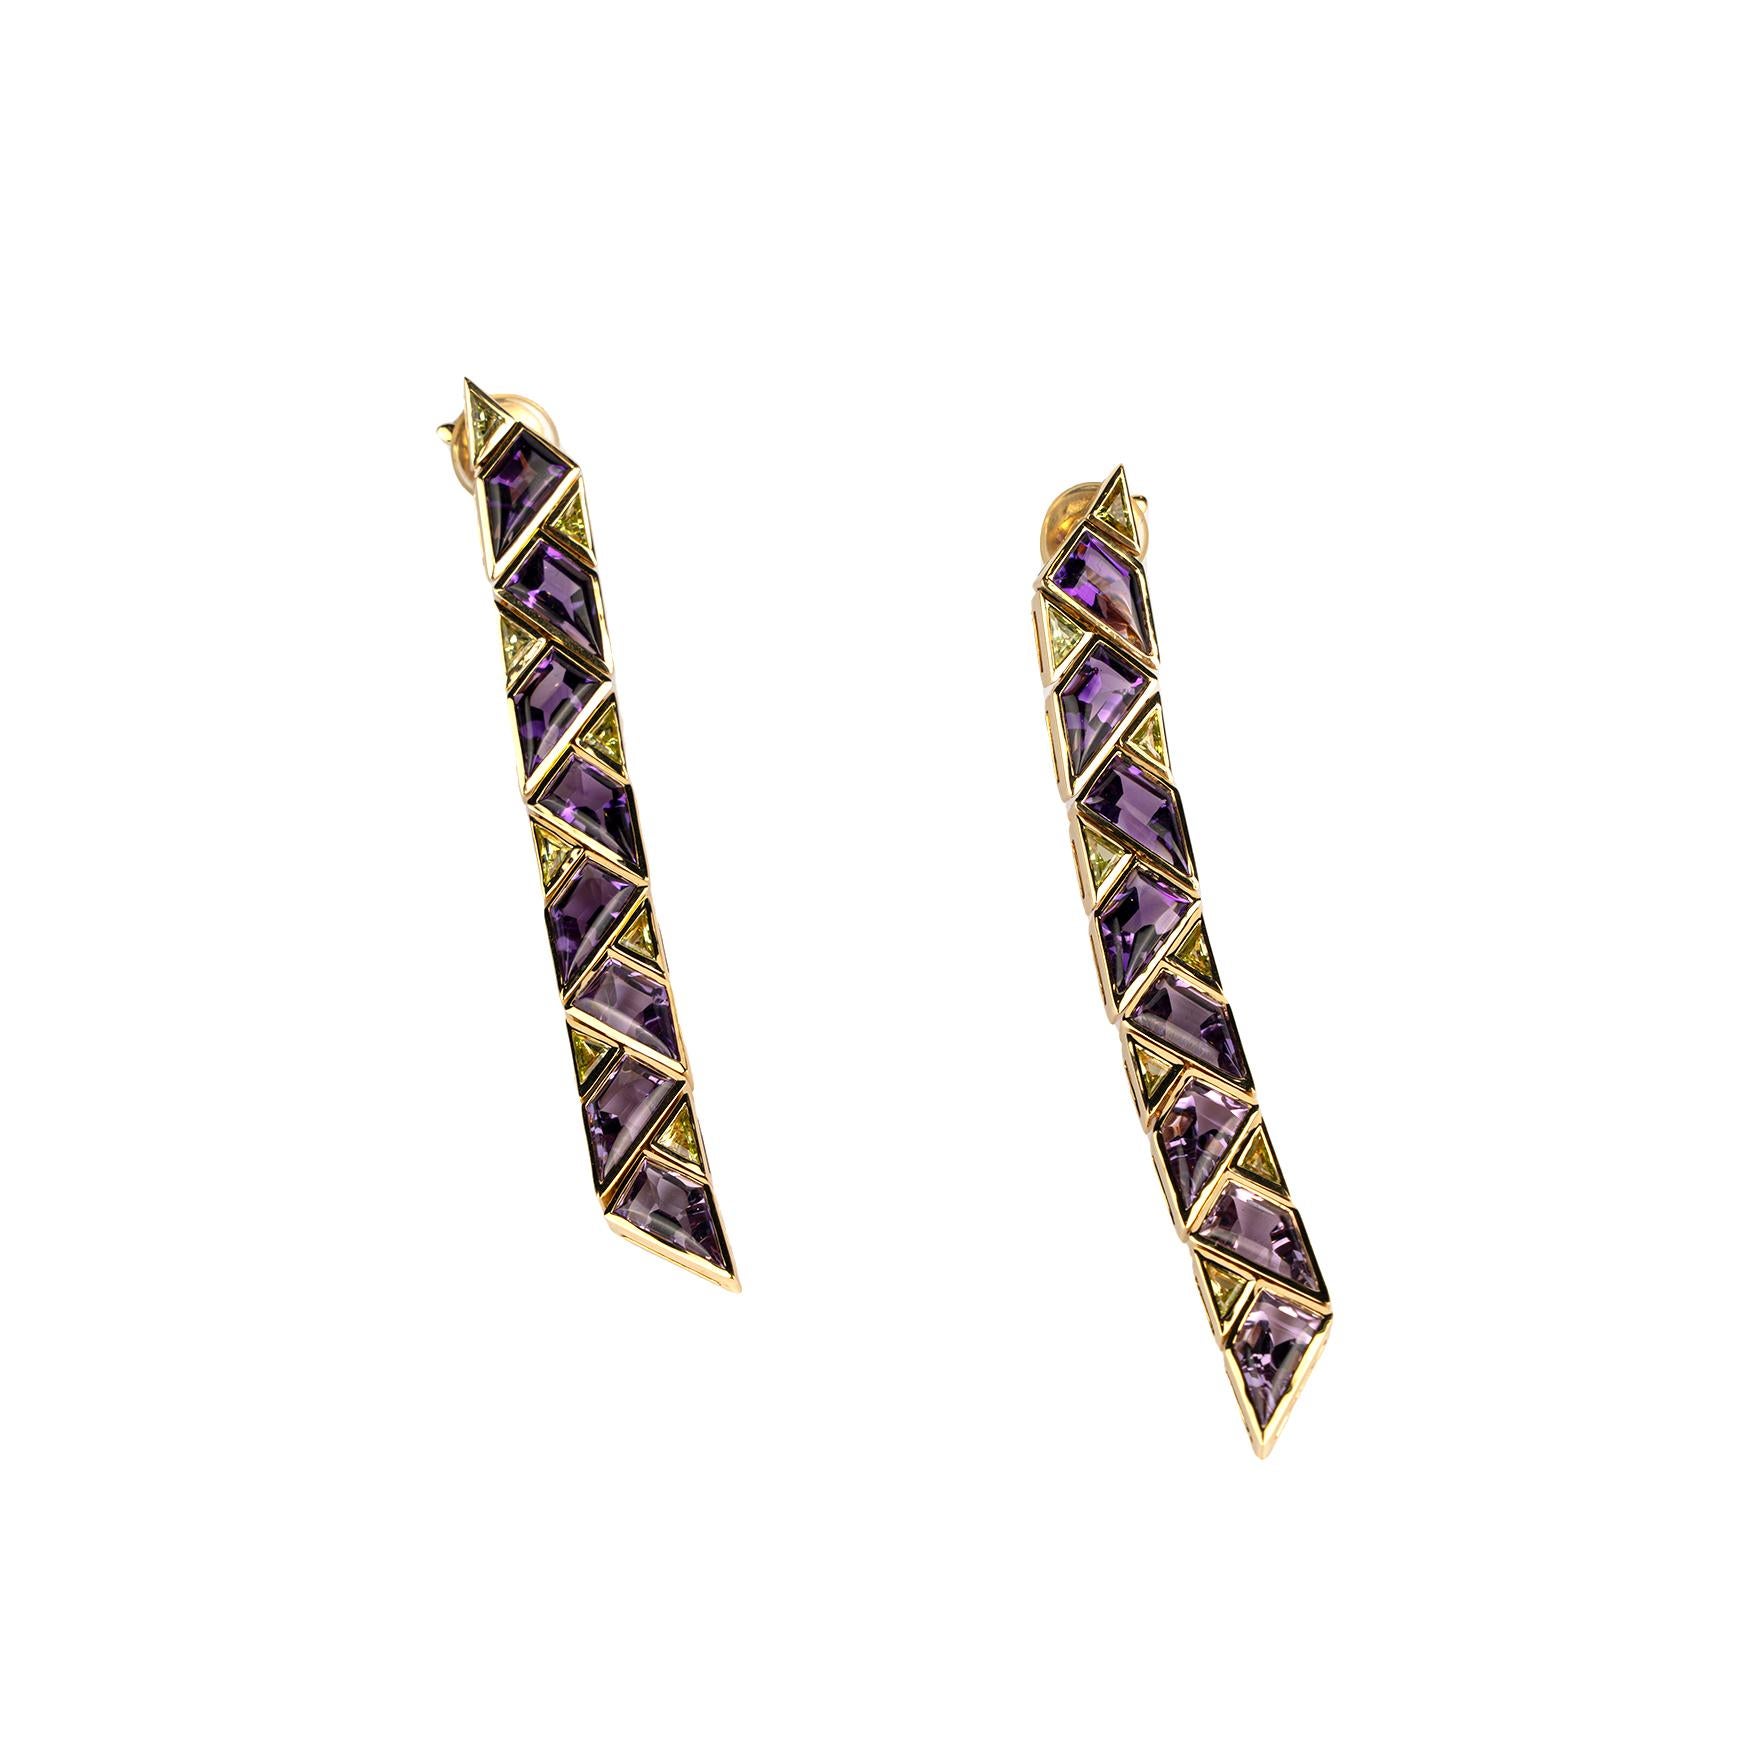 An exquisite pair of Marina B 'Pyramide' Earrings in 18k yellow gold with purple and green topaz. Made in Italy, circa 1989.